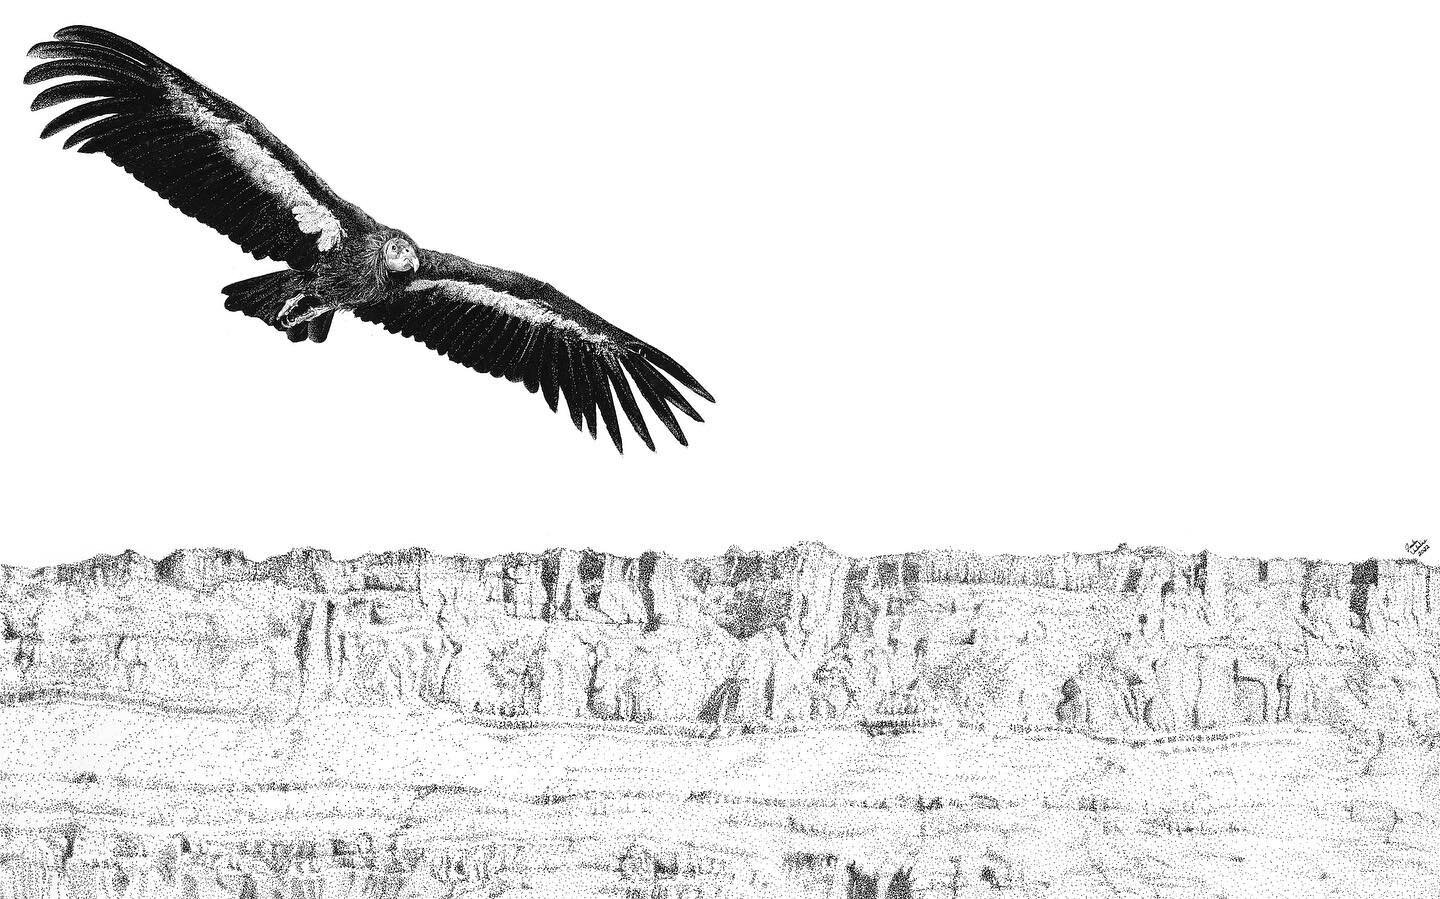 New condor print for sale on my website!!